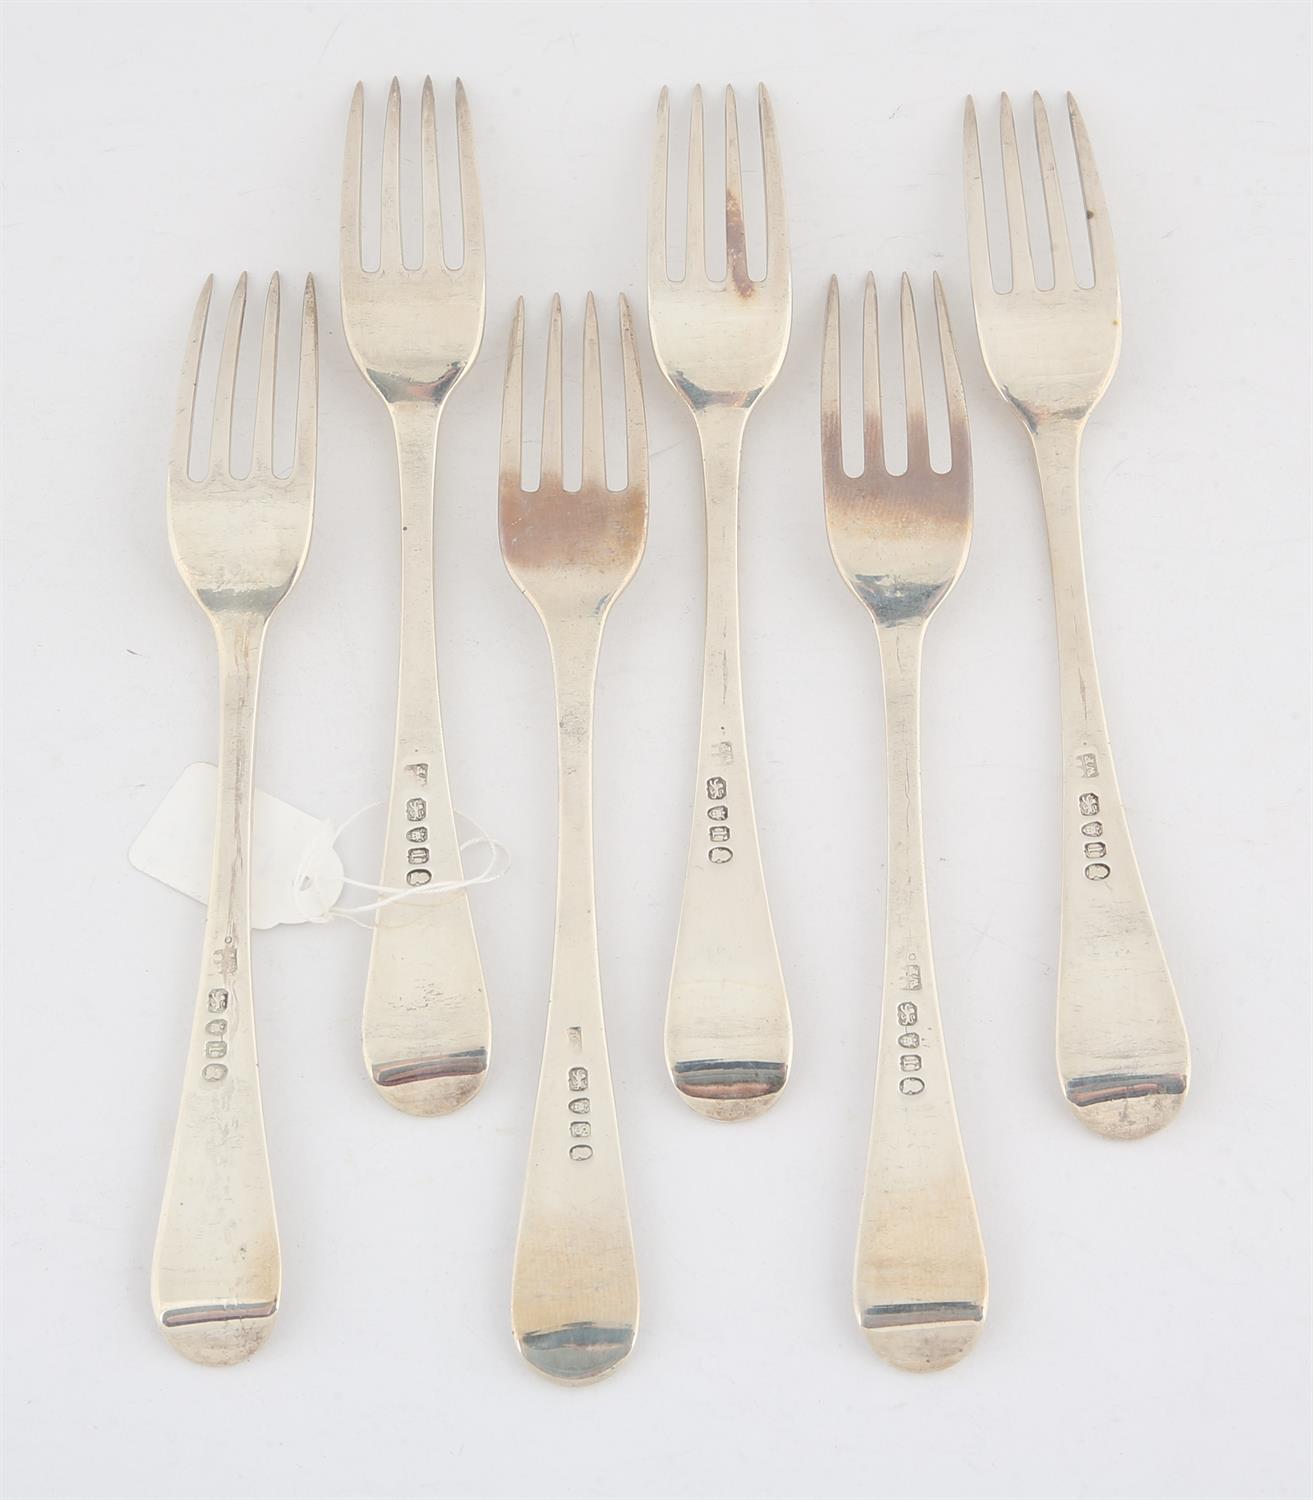 Six George III silver Old English pattern table forks, 12.3 ozs 382 grams SILVER COLLECTION OF - Image 2 of 2